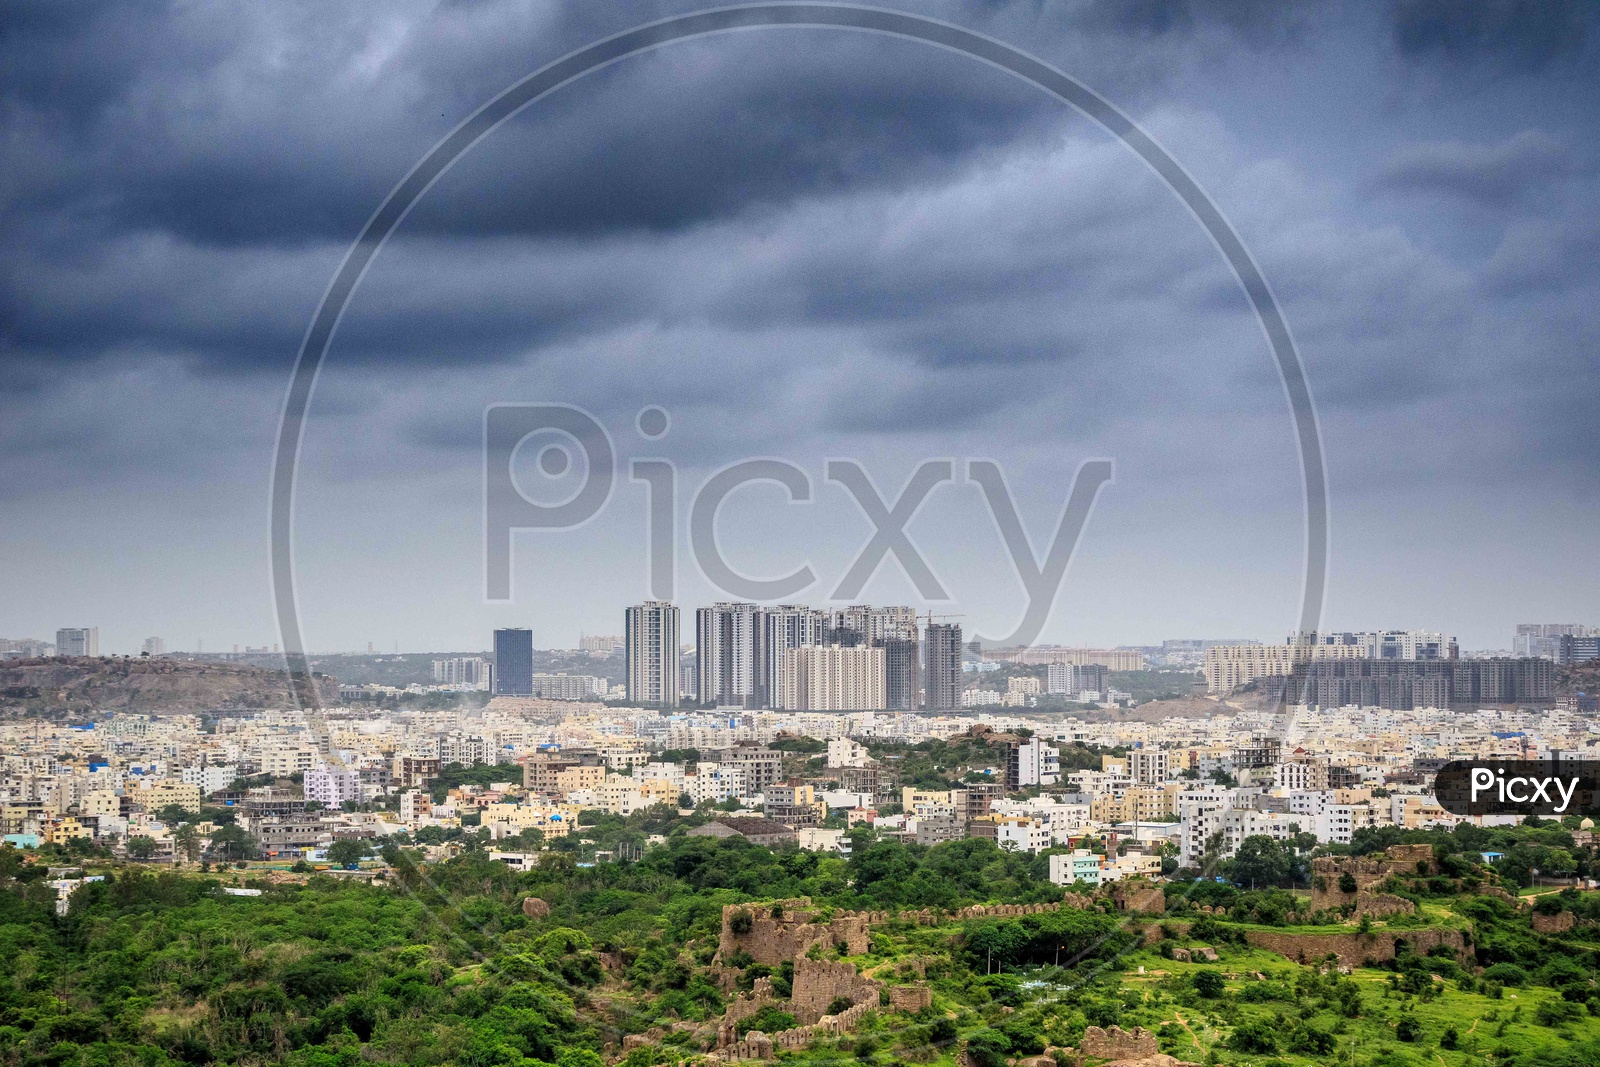 Hyderabad City Scape With High Rise Buildings on a Cloudy Day With Thick Dark Clouds in Sky